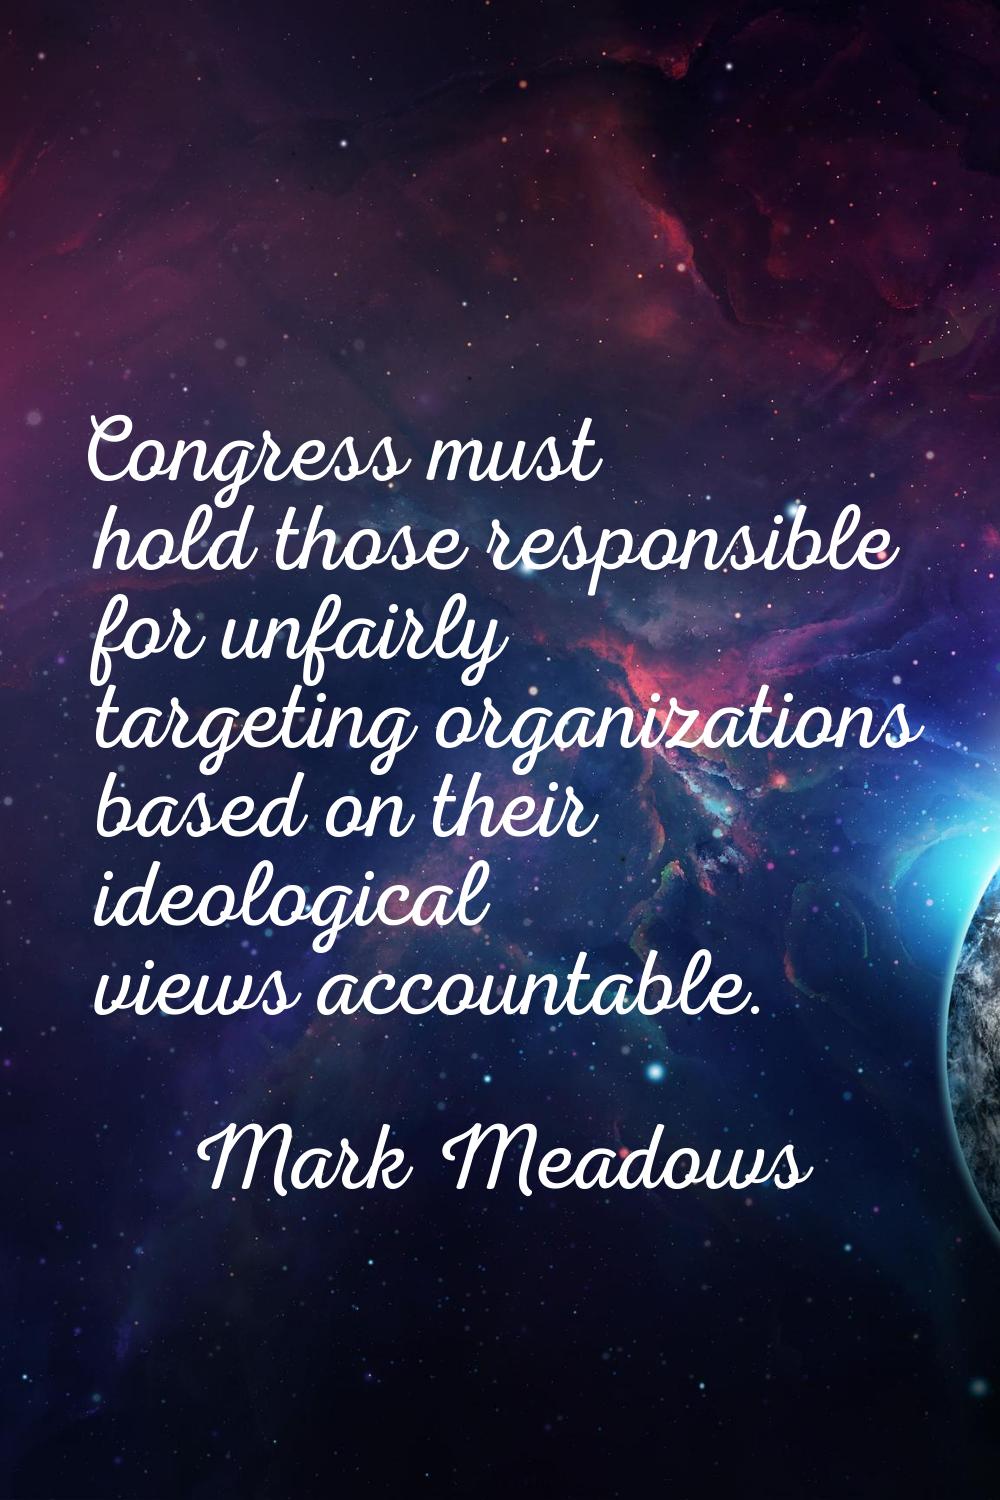 Congress must hold those responsible for unfairly targeting organizations based on their ideologica